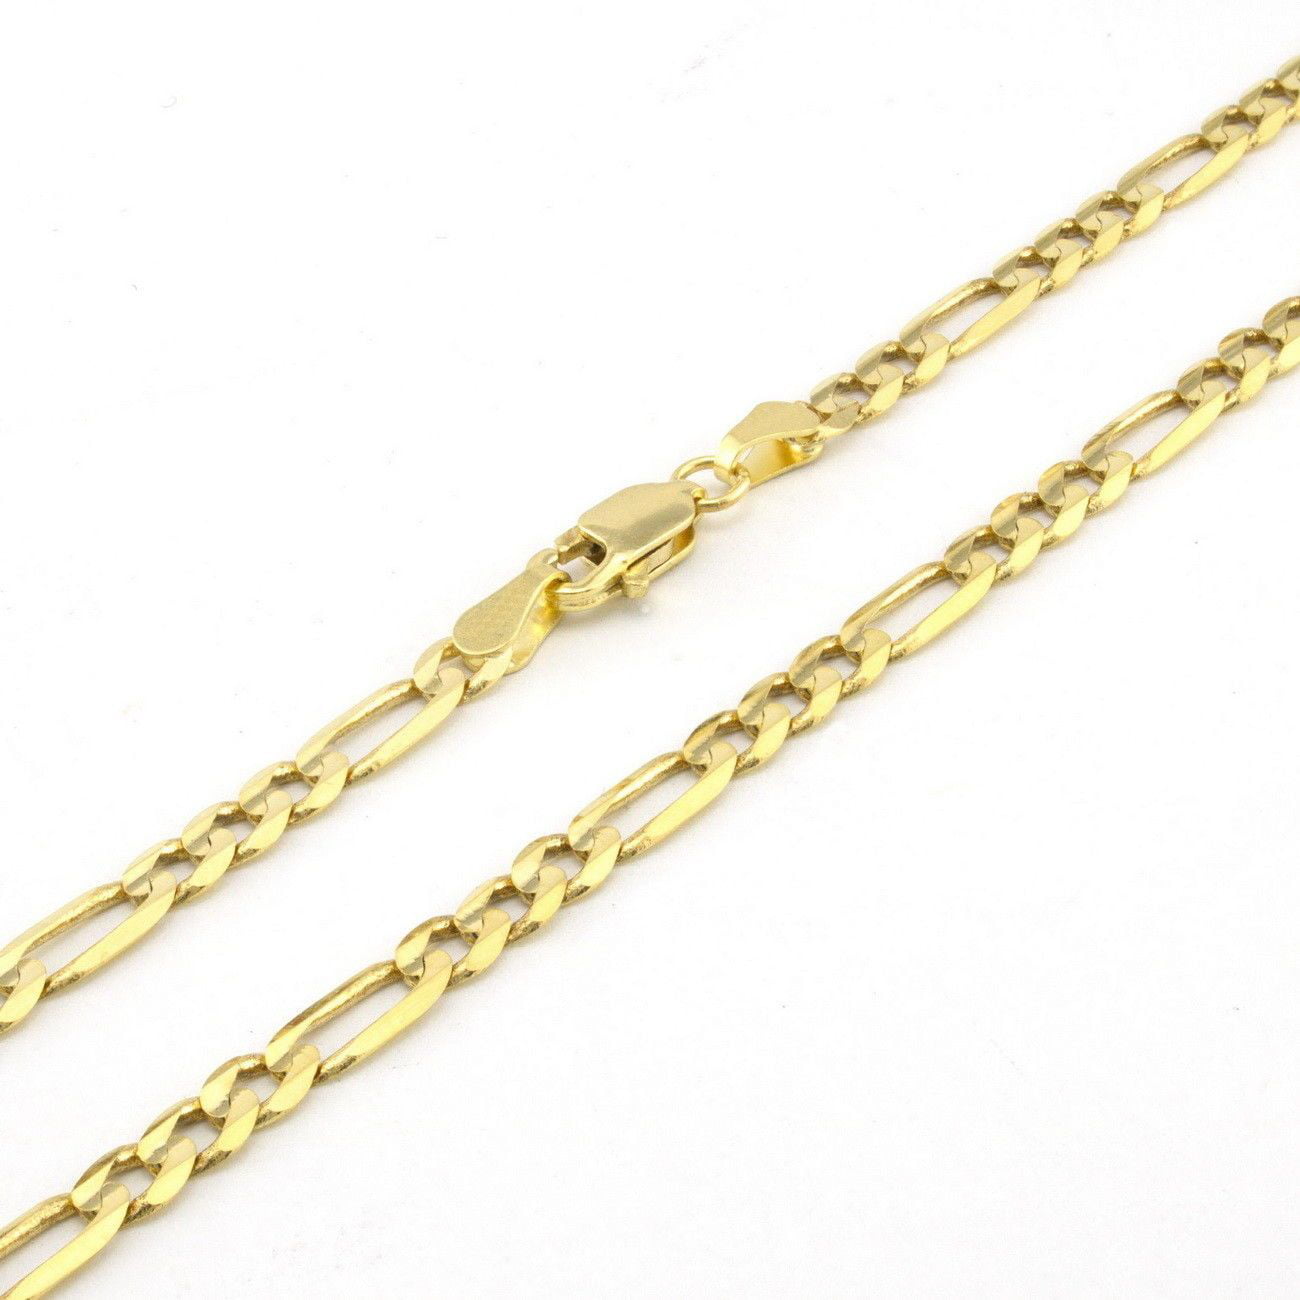 Jewelers 3.5MM Figaro Chain Necklace in 10K Solid Gold BOXED - Walmart.com